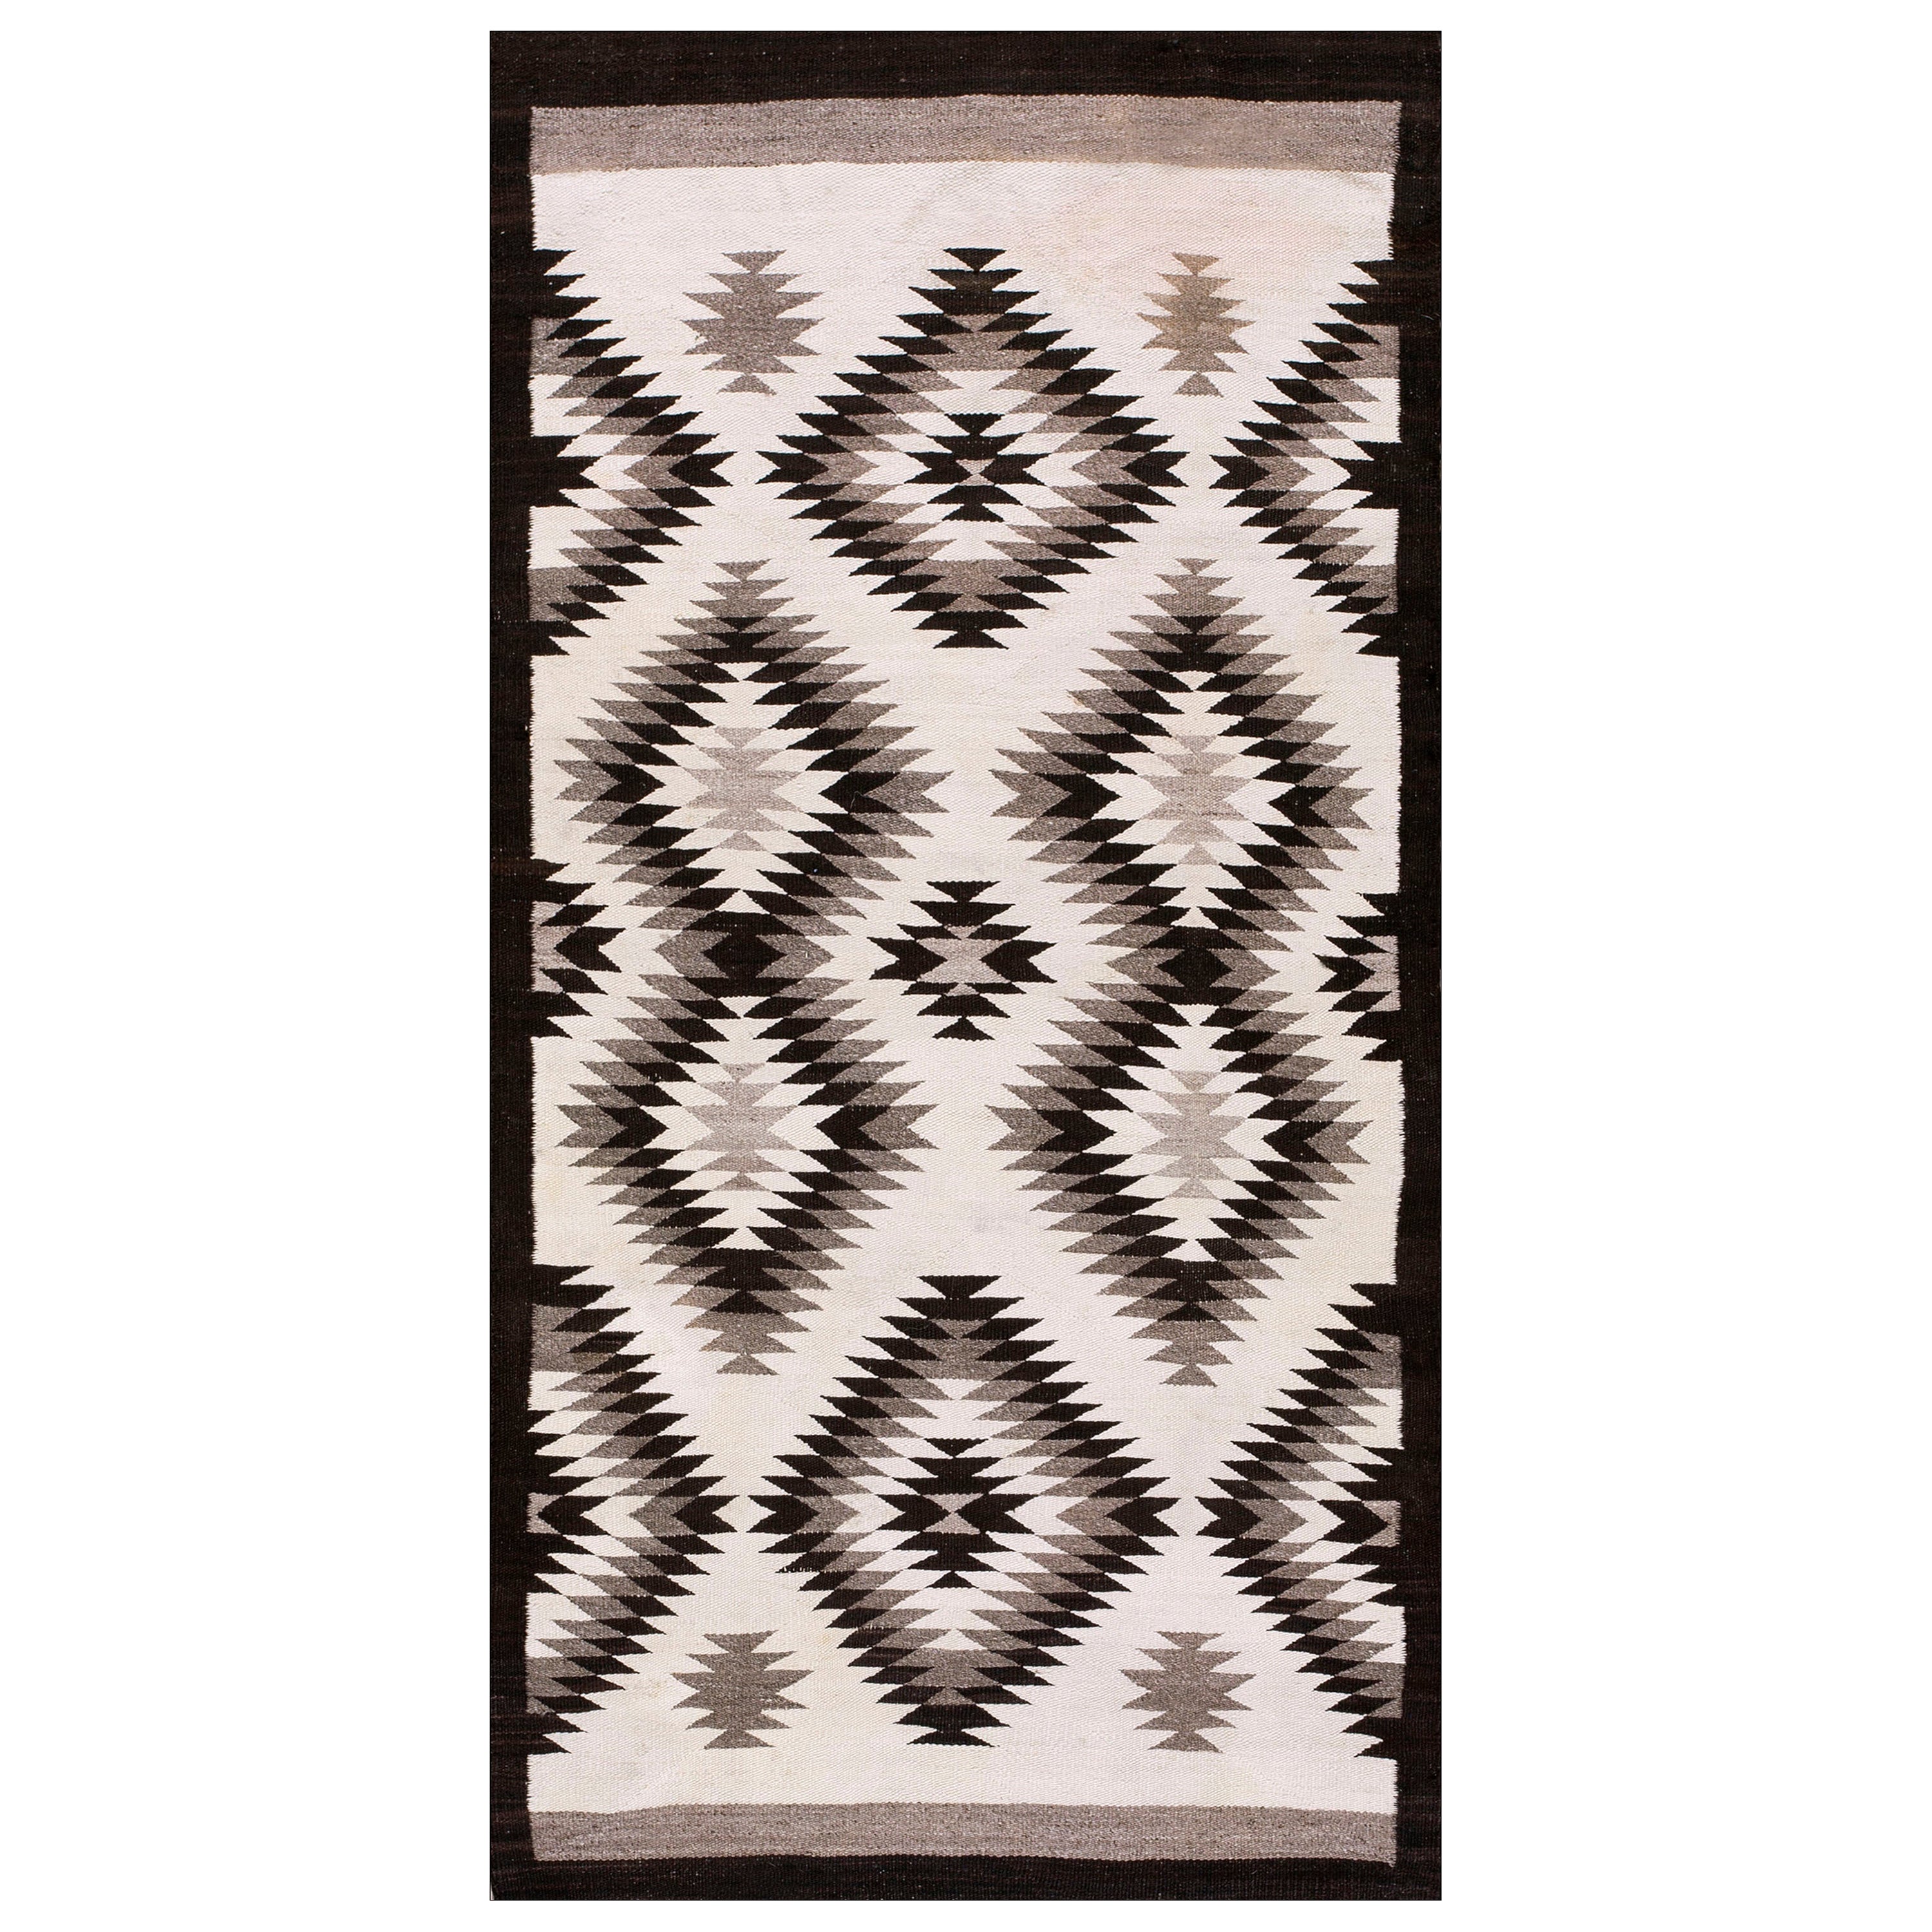 Early 20th Century American Navajo Carpet ( 3'3'' x 6'4'' - 99 x 193 ) For Sale